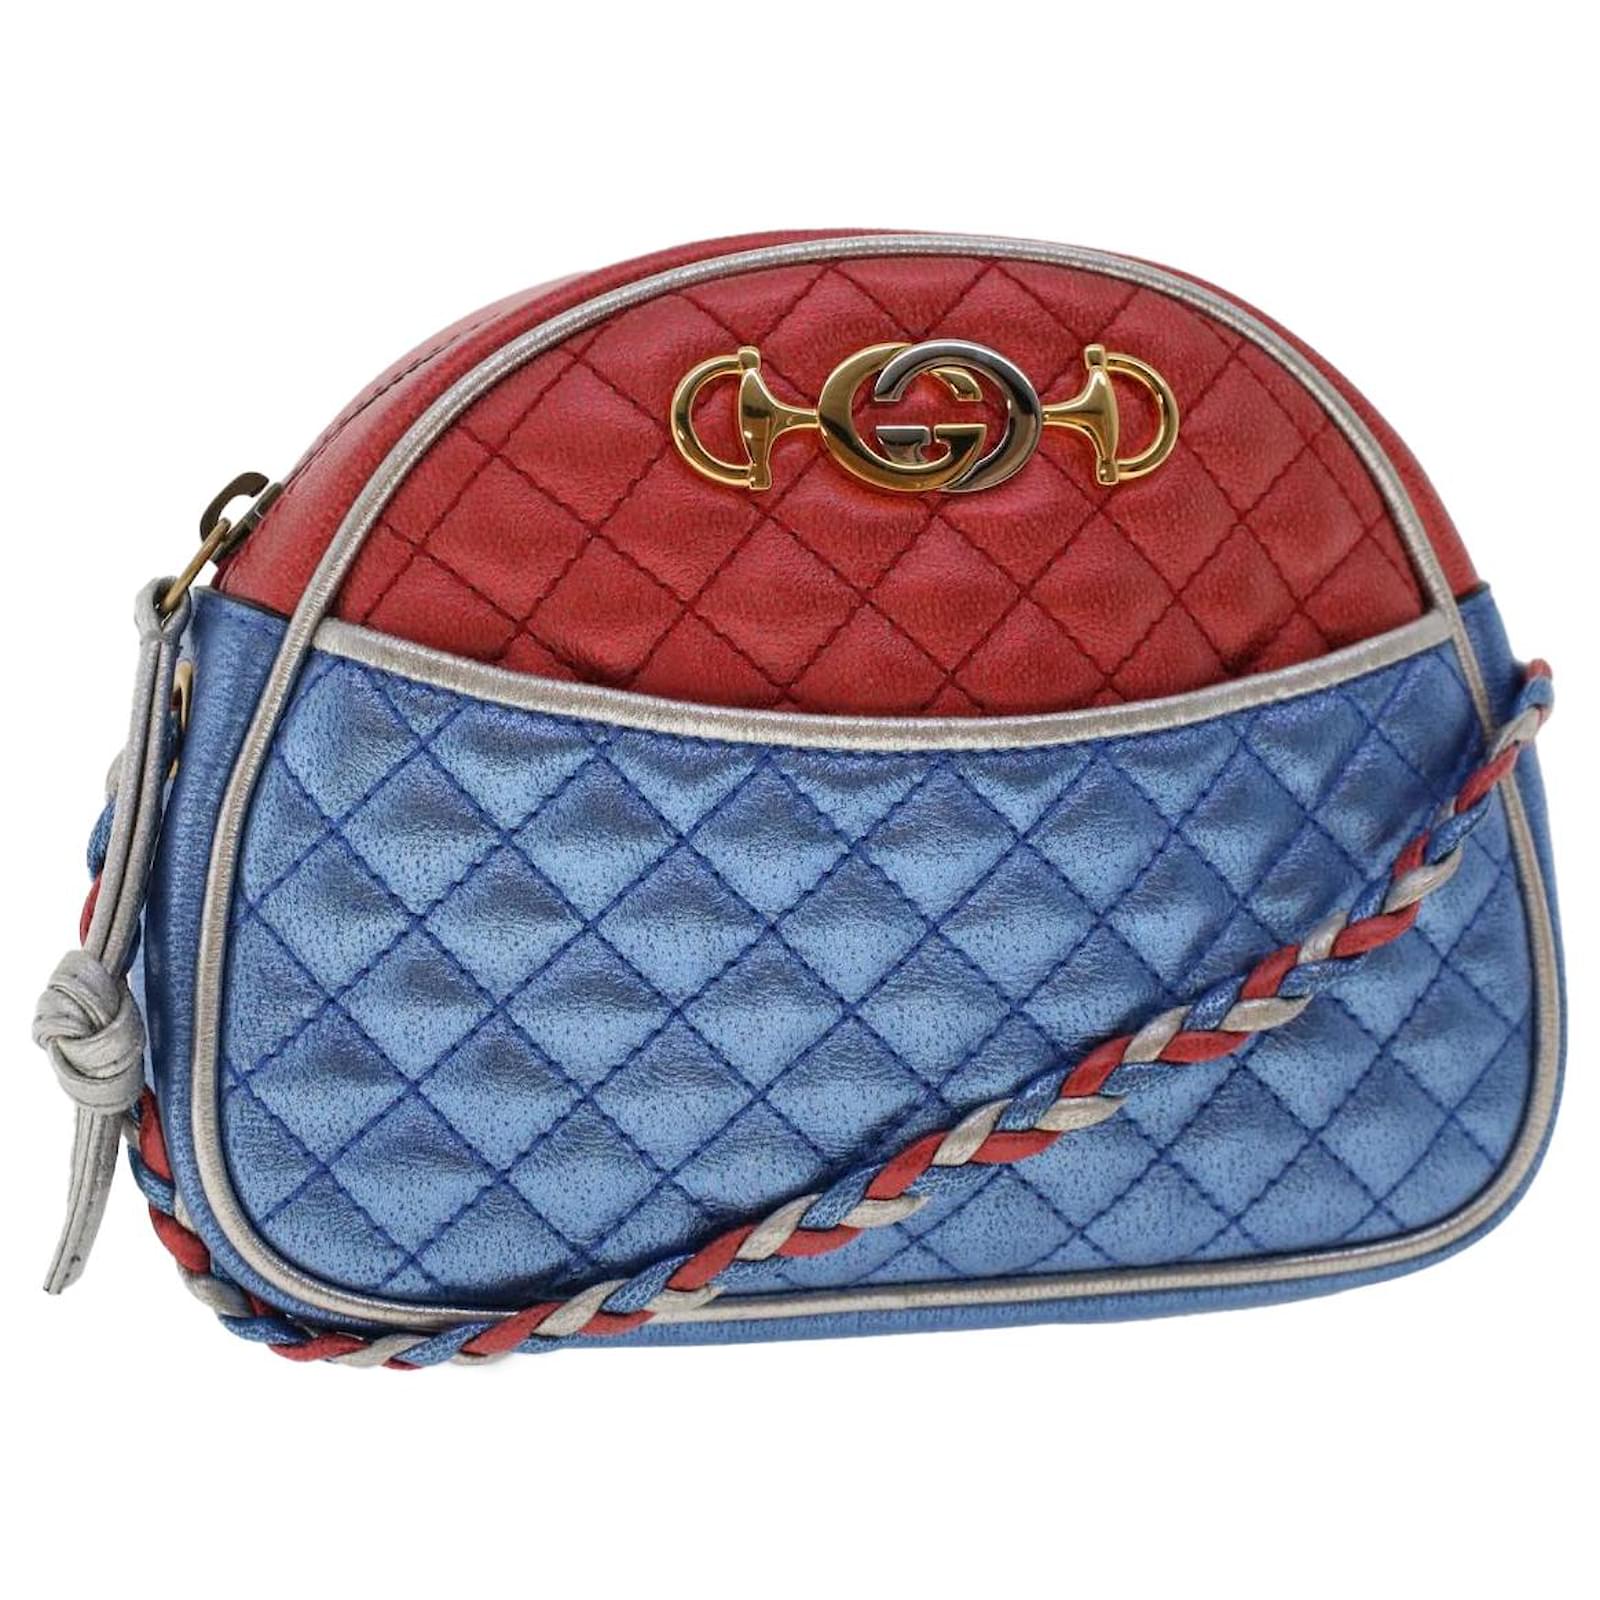 Gucci Vintage Navy Blue Lambskin Leather Bamboo Crossbody Bag